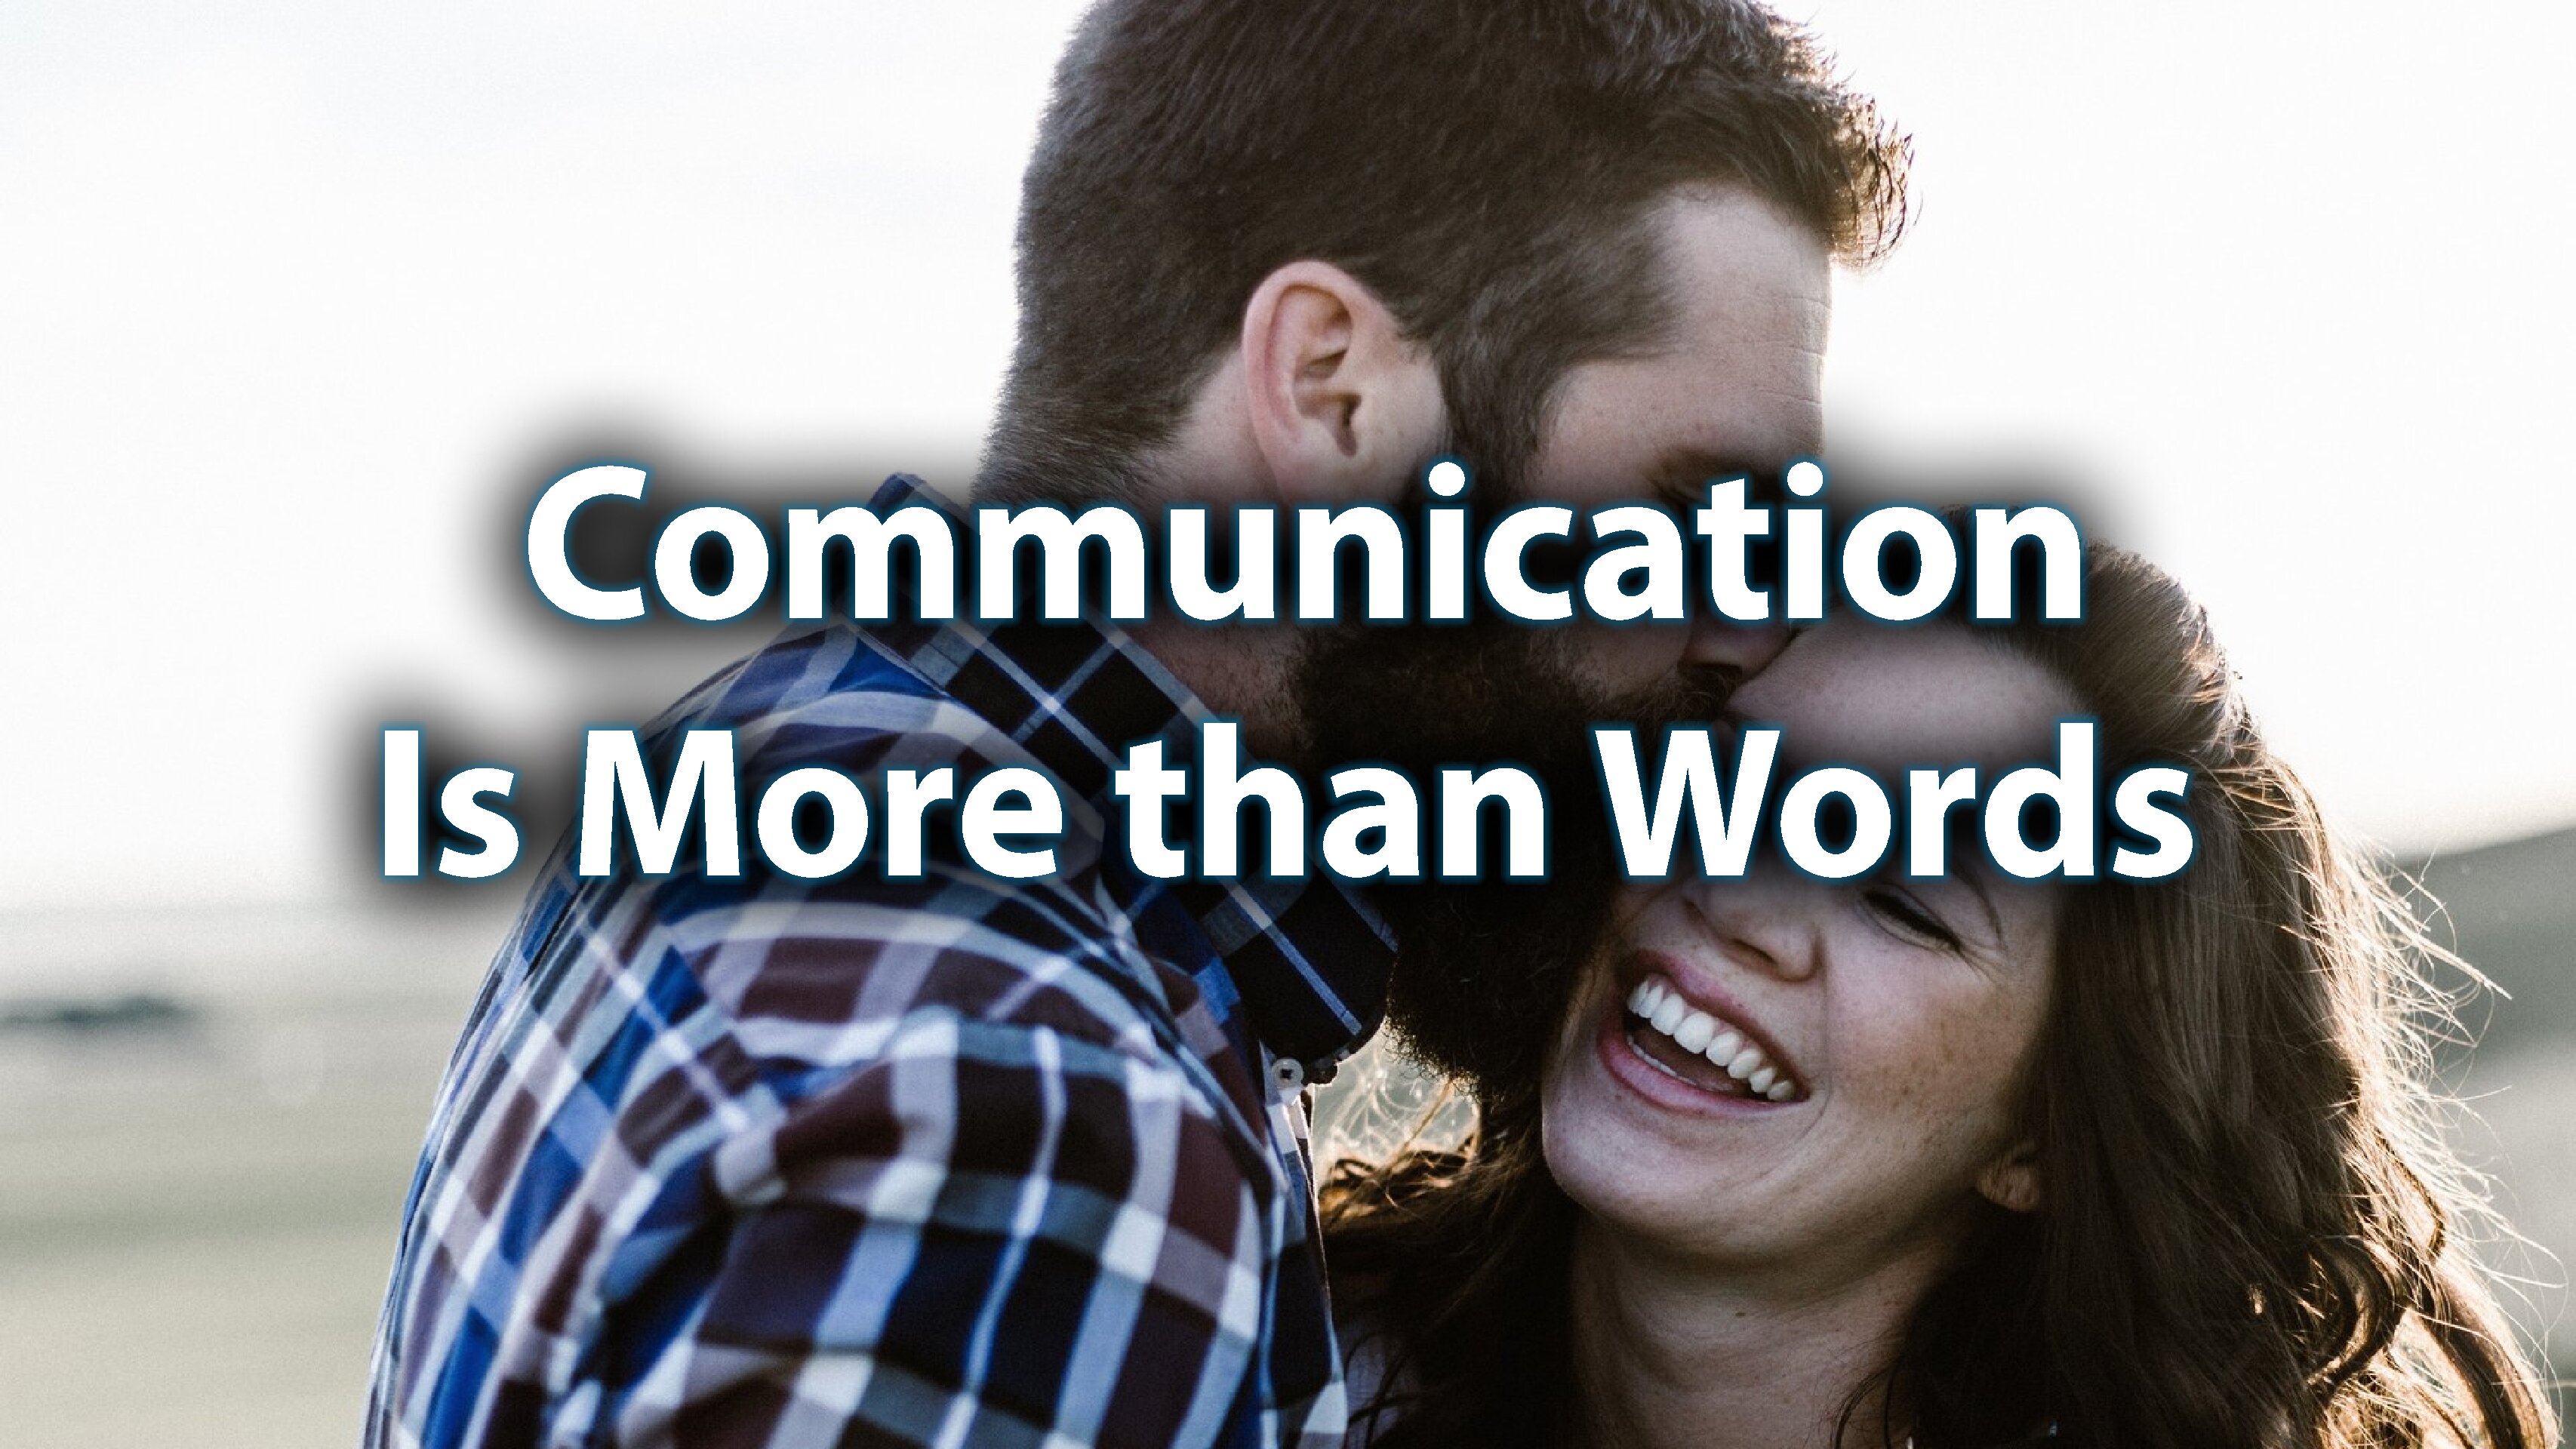 Day 11: Communication is More than Words